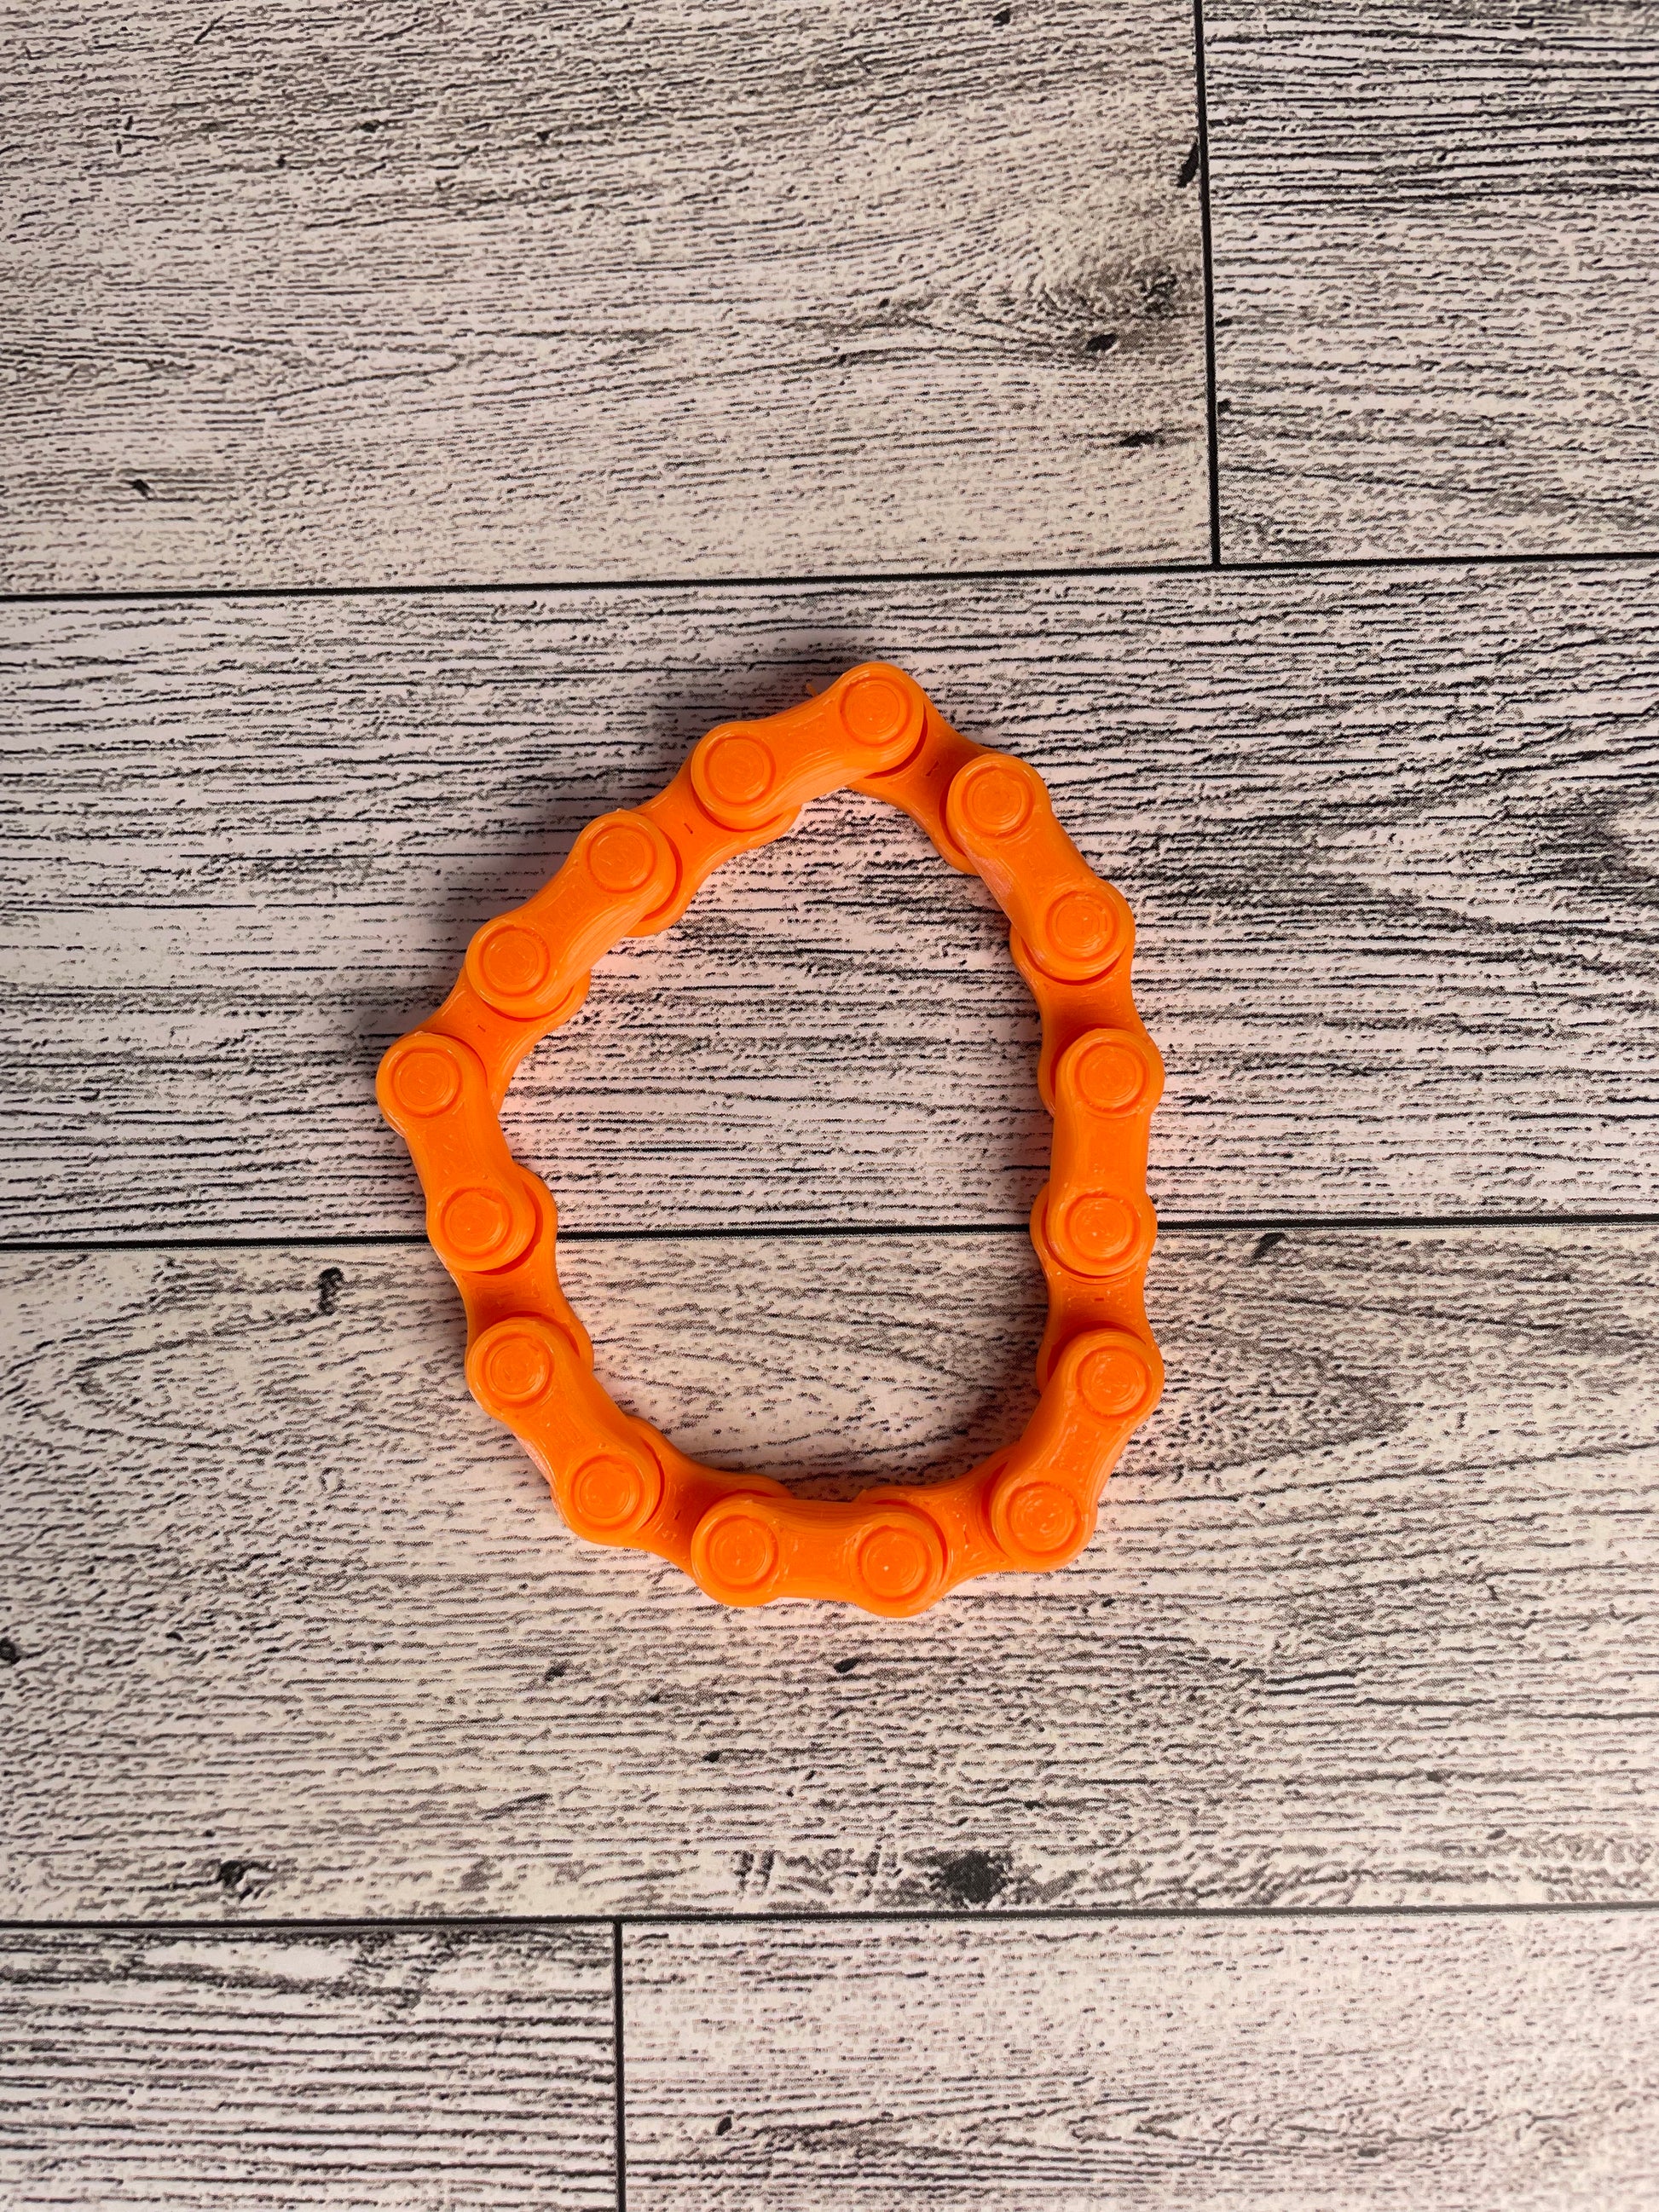 A orange chain link on a wood backdrop. The chain is arranged in a circle shape and there are eight links.